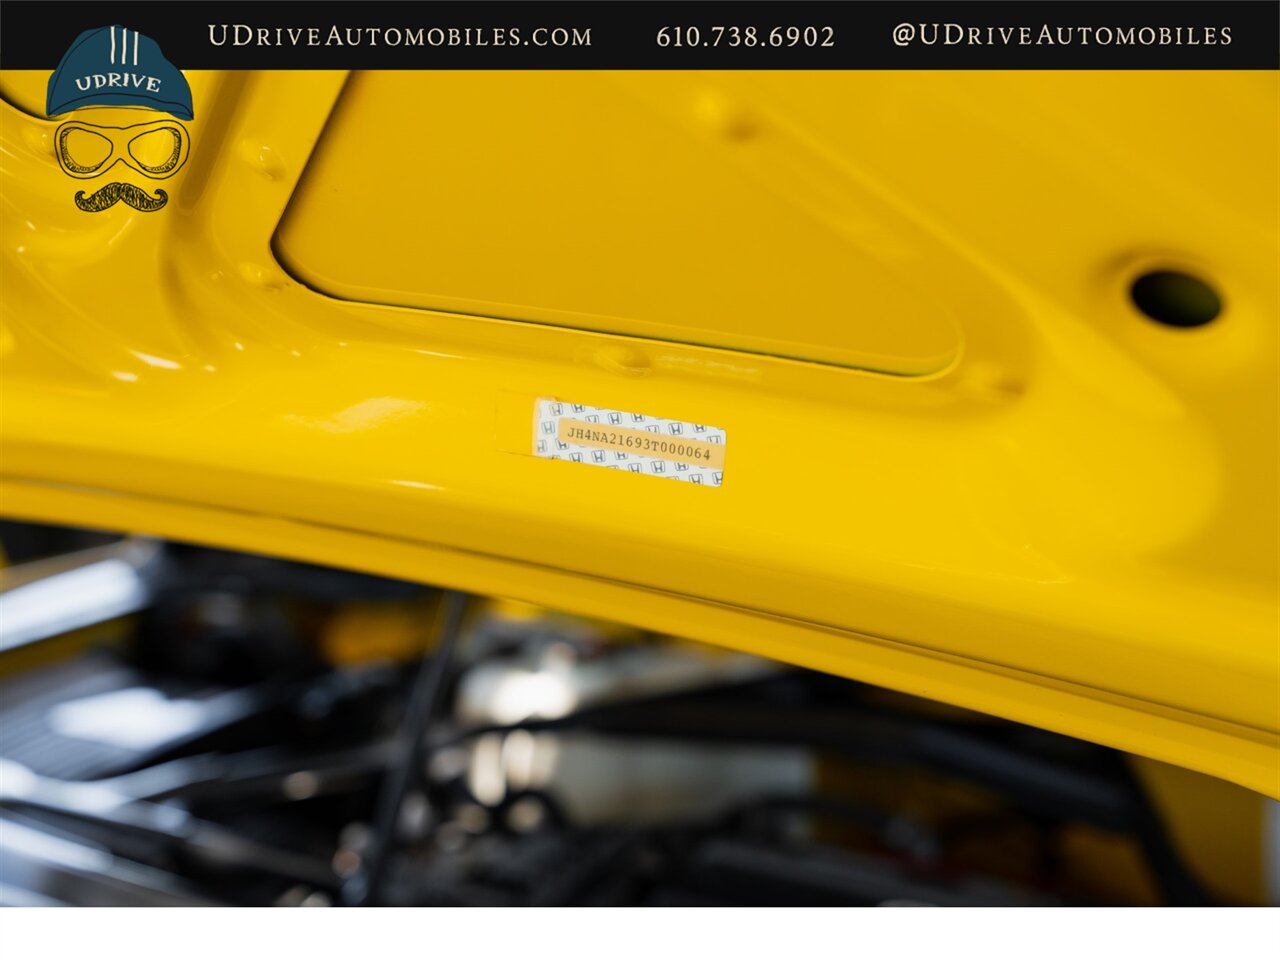 2003 Acura NSX NSX-T  Spa Yellow over Yellow Lthr 1 of 13 Produced - Photo 55 - West Chester, PA 19382